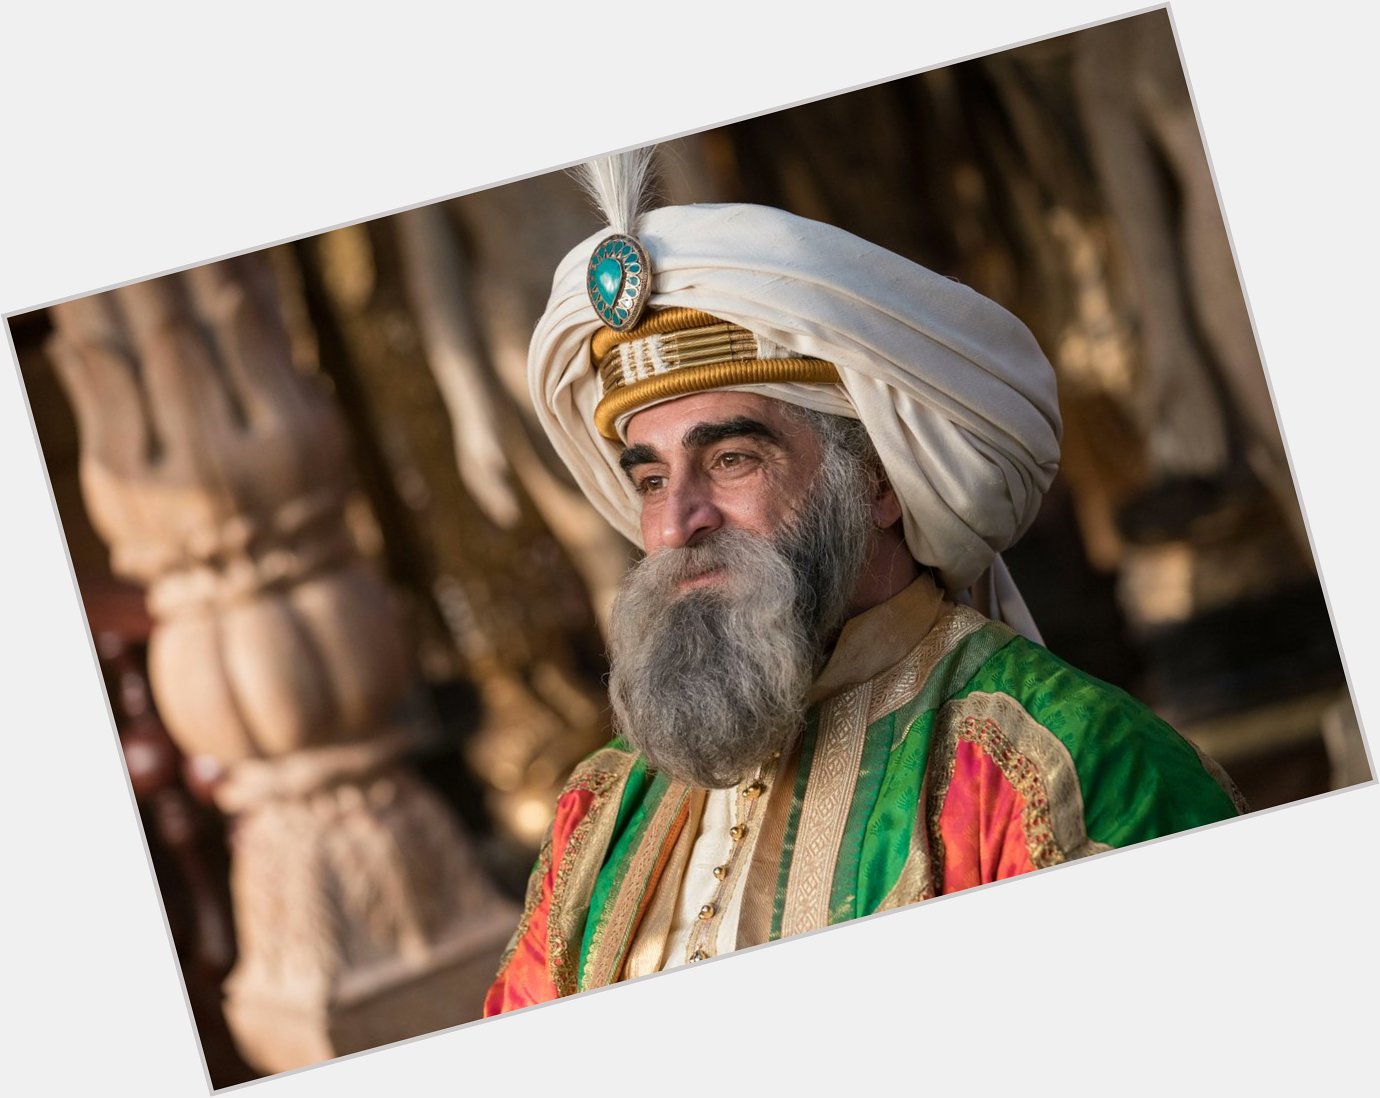 Happy Birthday, Navid Negahban
For Disney, he portrayed The Sultan in the 2019 live-action adaptation of 